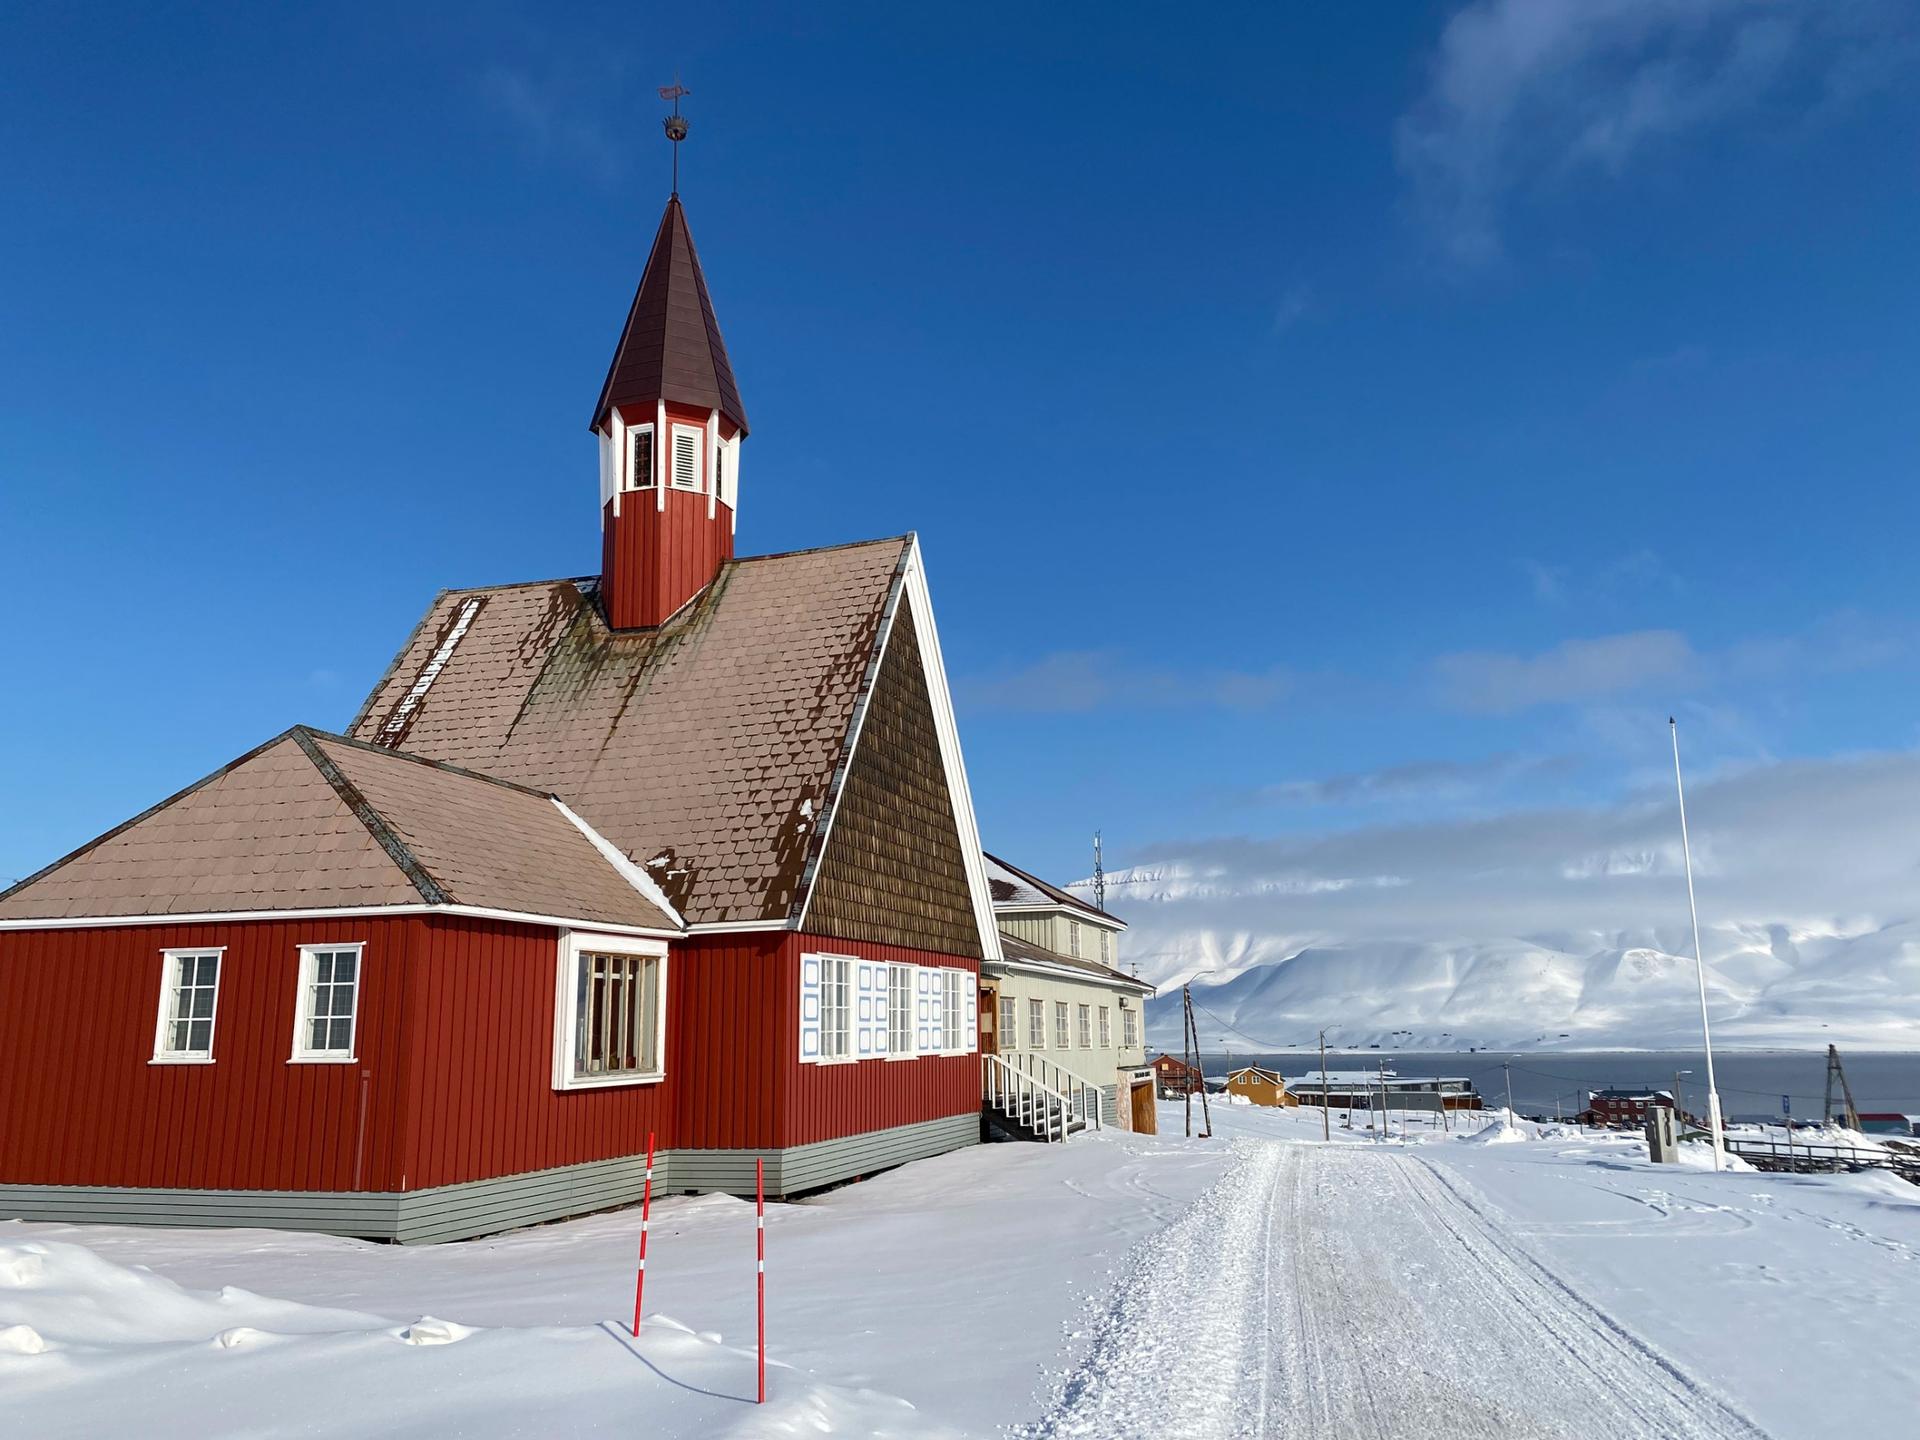 Longyearbyen has fewer than 2,500 residents, but it’s home to a university, a post office, and a church. 